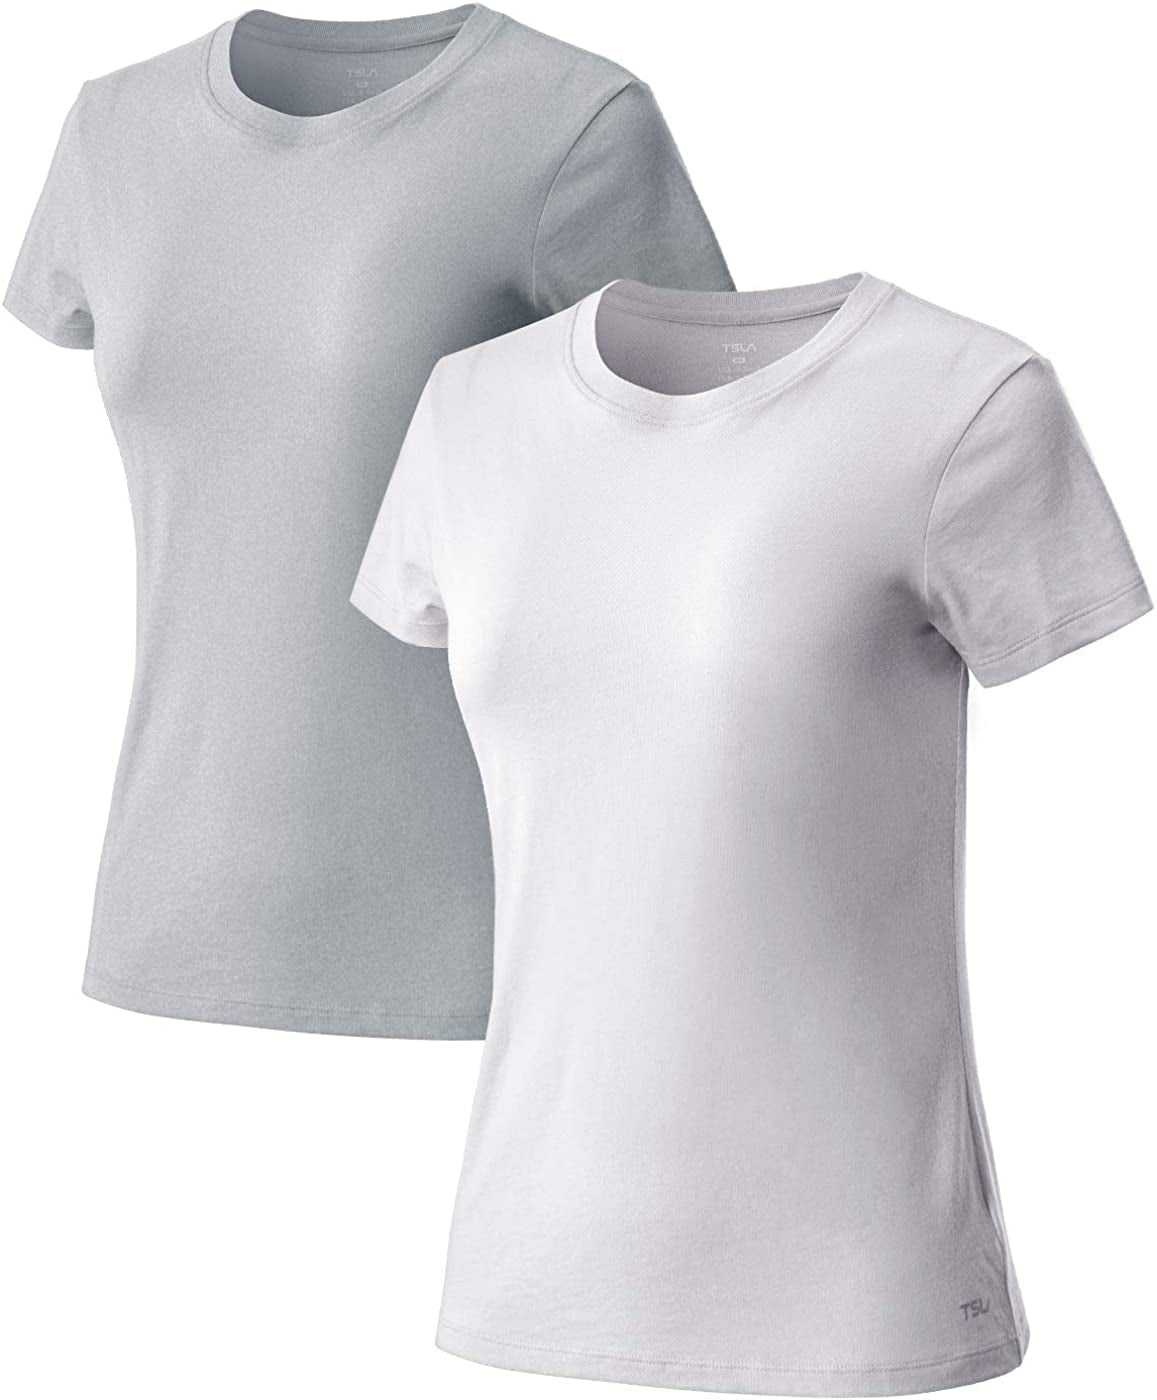  2 Pack Women's Workout Shirts, Dry Fit Wicking Short Sleeve Shirts, Active Sports Running Exercise Gym Tee Shirt